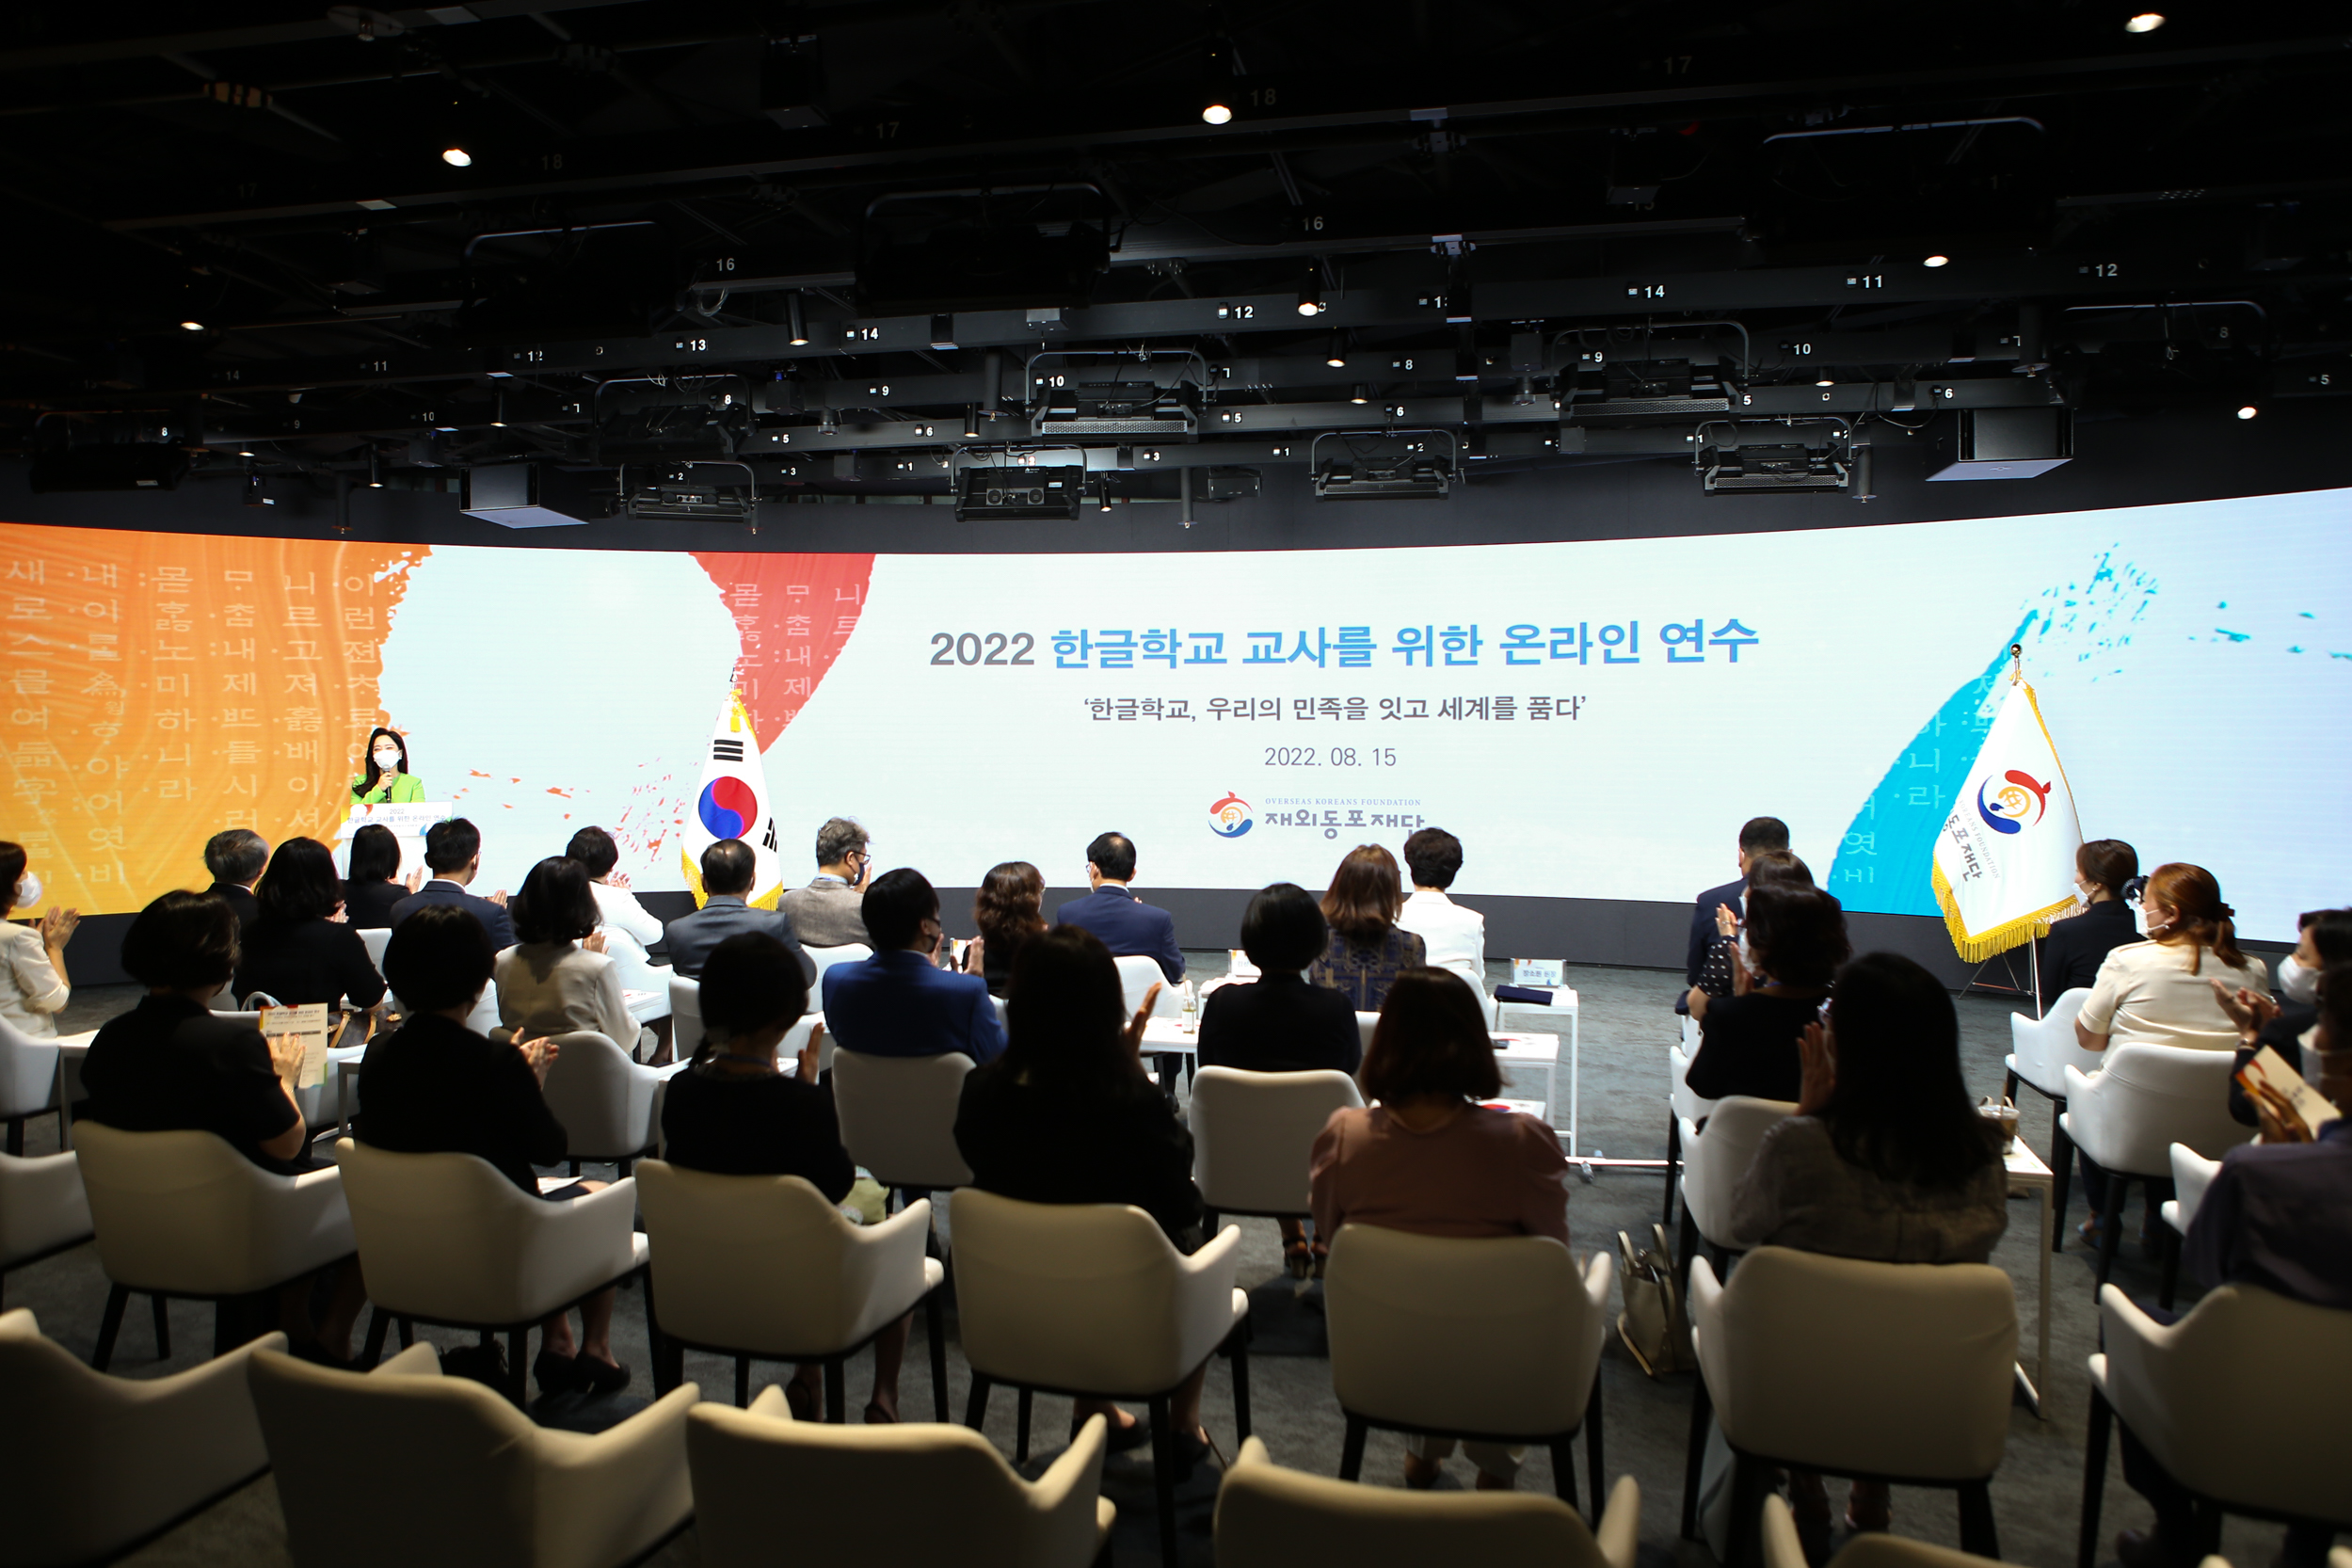 Participants at the opening ceremony of online training for Korean language school teachers